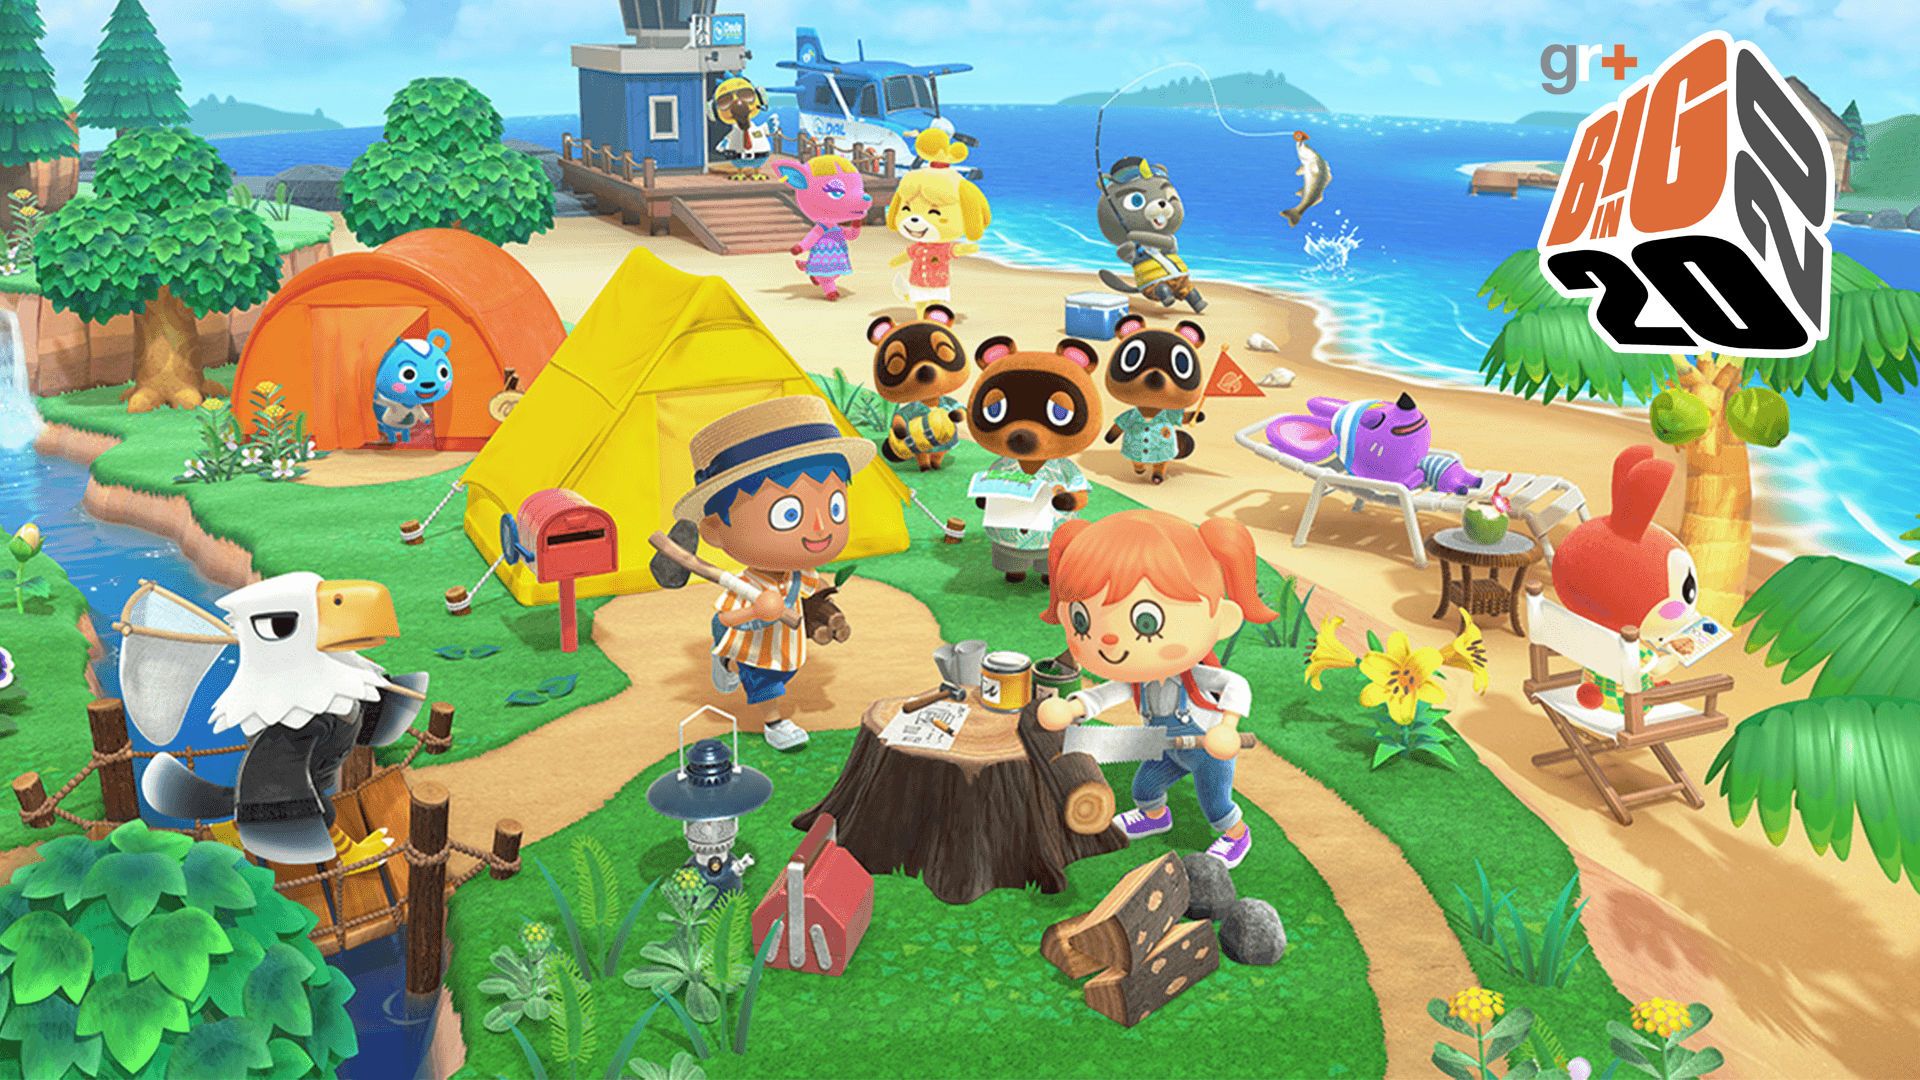 Big in 2020: Animal Crossing: New Horizons is all set to pole